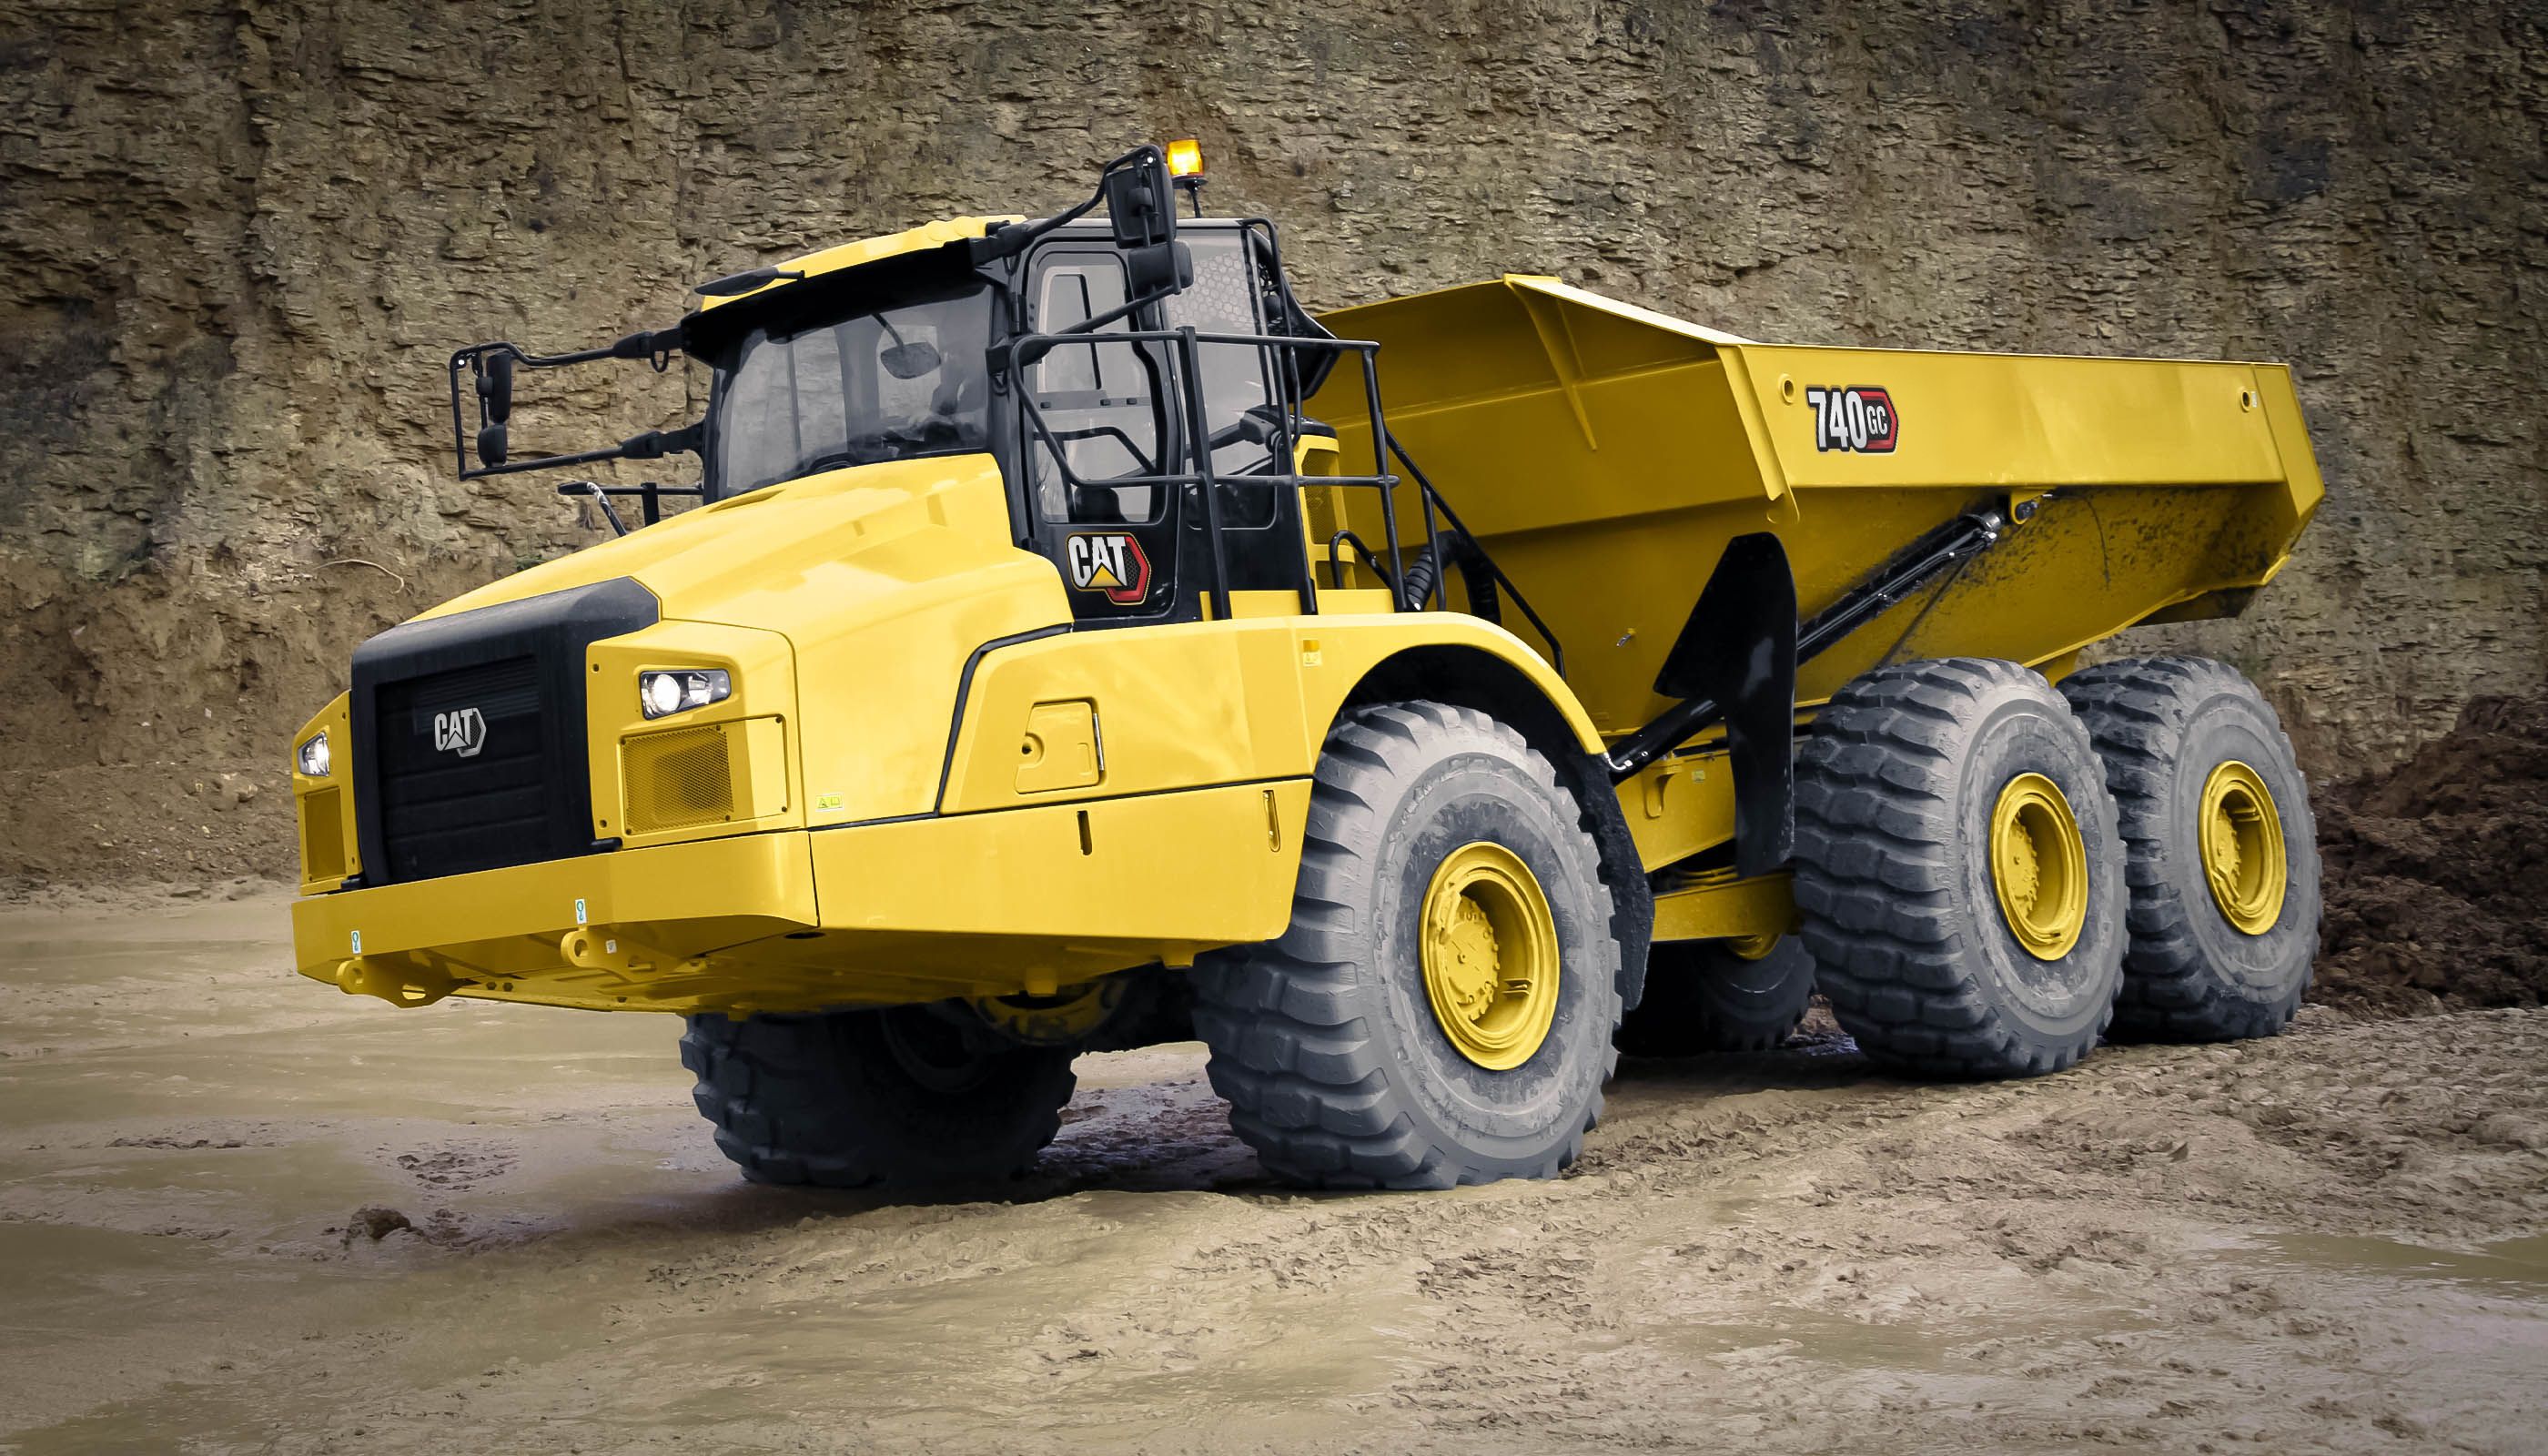 7 Tips & What to Look For When Buying a Used Dump Truck